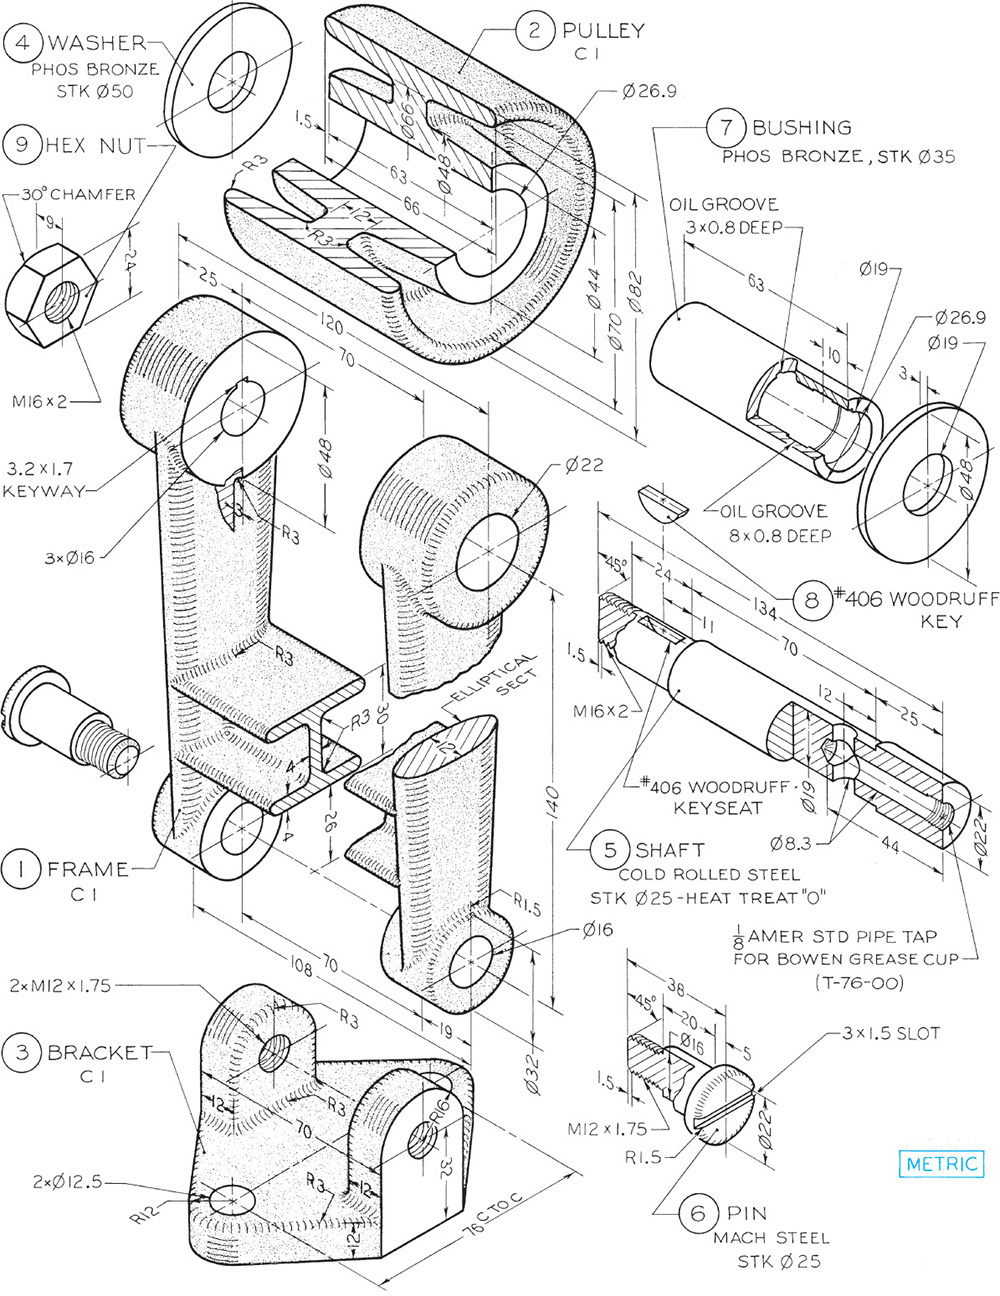 Figure shows the parts of belt tightener.